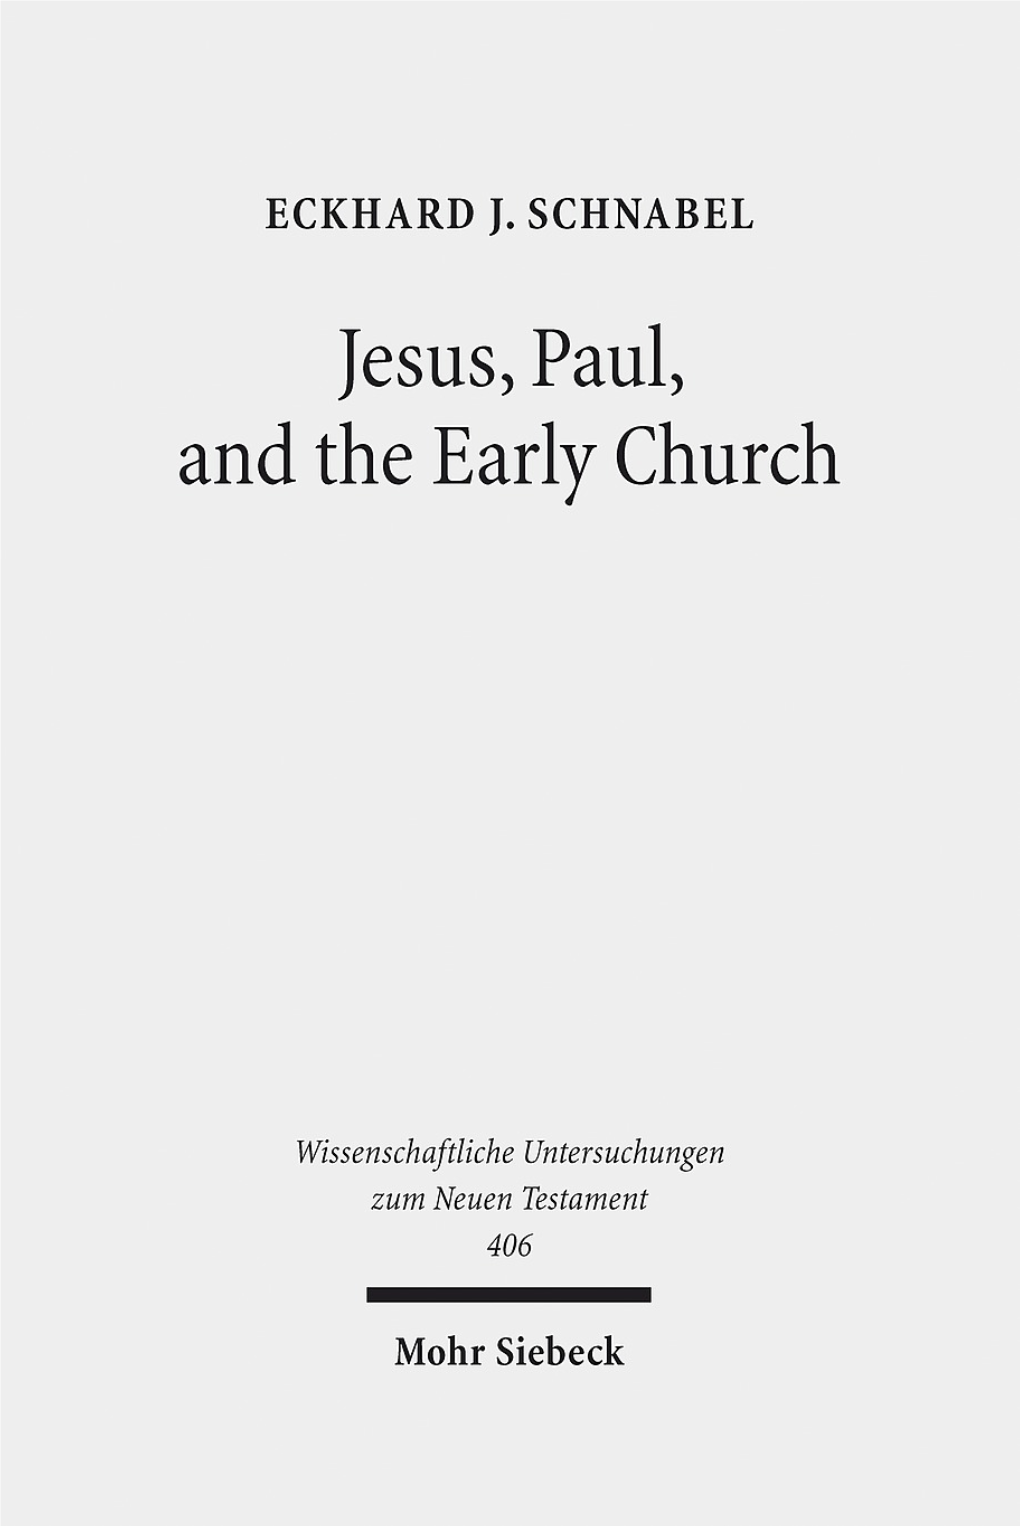 Jesus Paul, and the Early Church